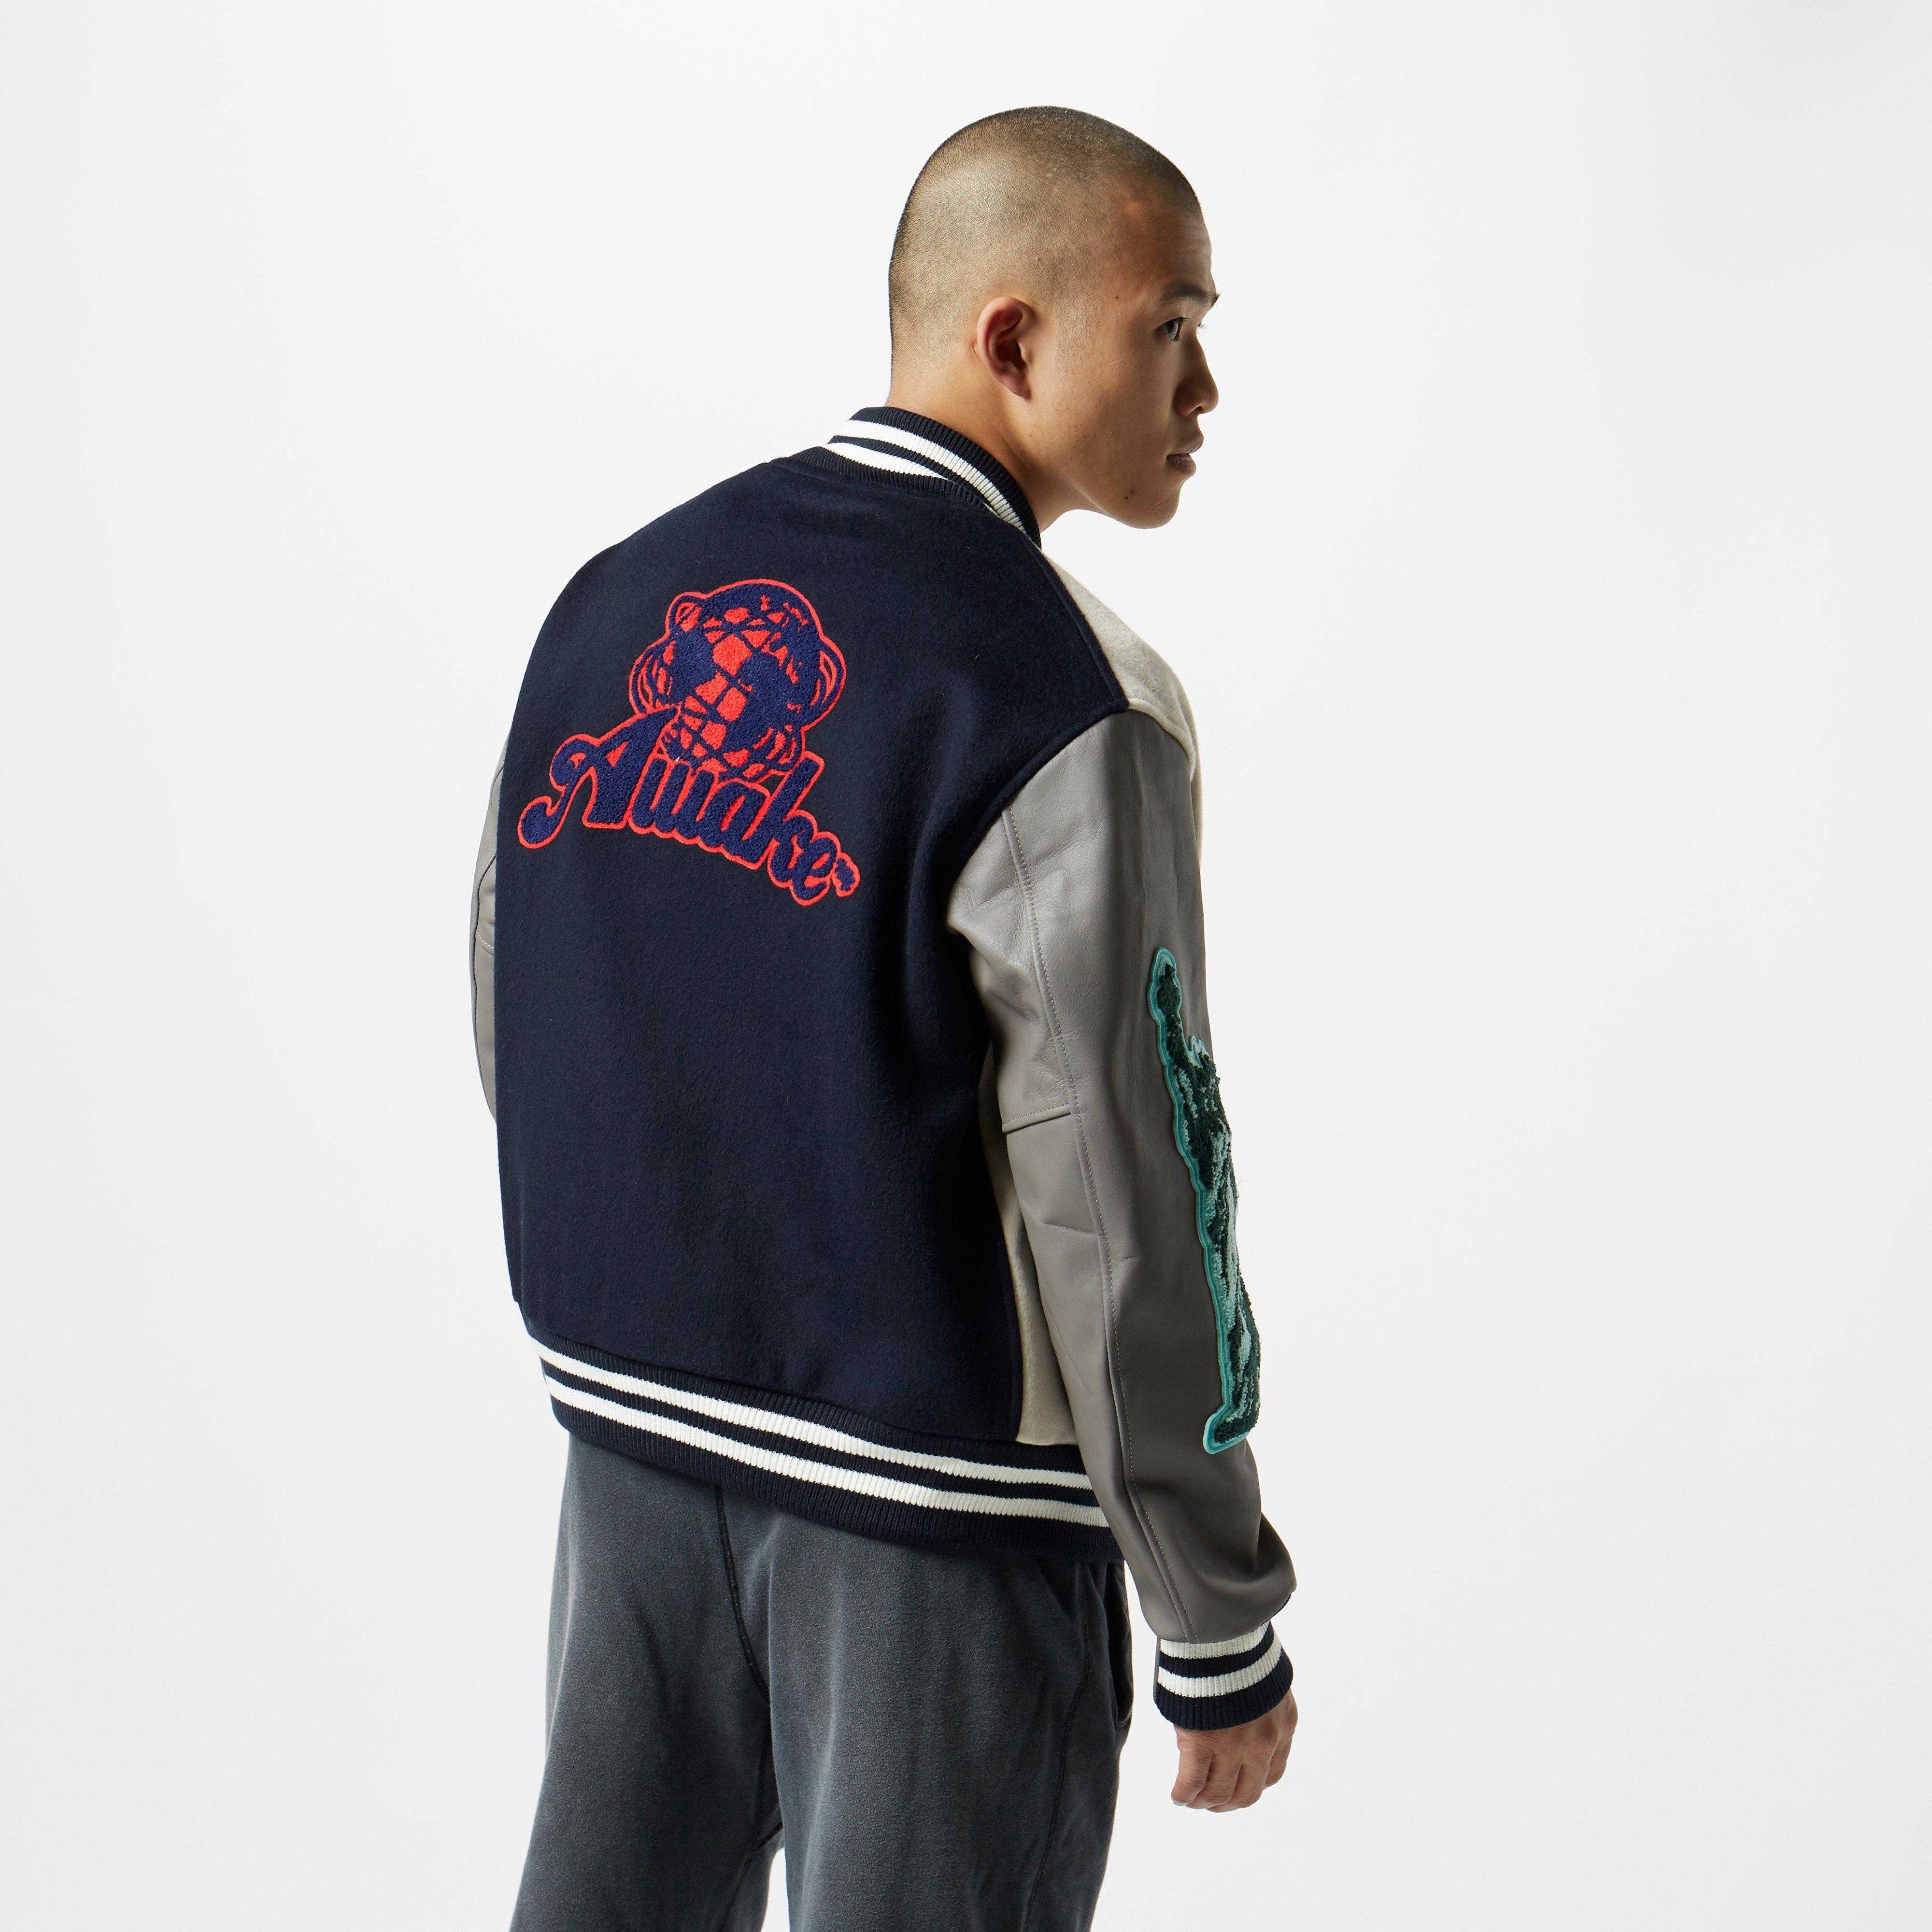 AWAKE NY Wool Chenille Patches Varsity Jacket in Navy (Blue) for 